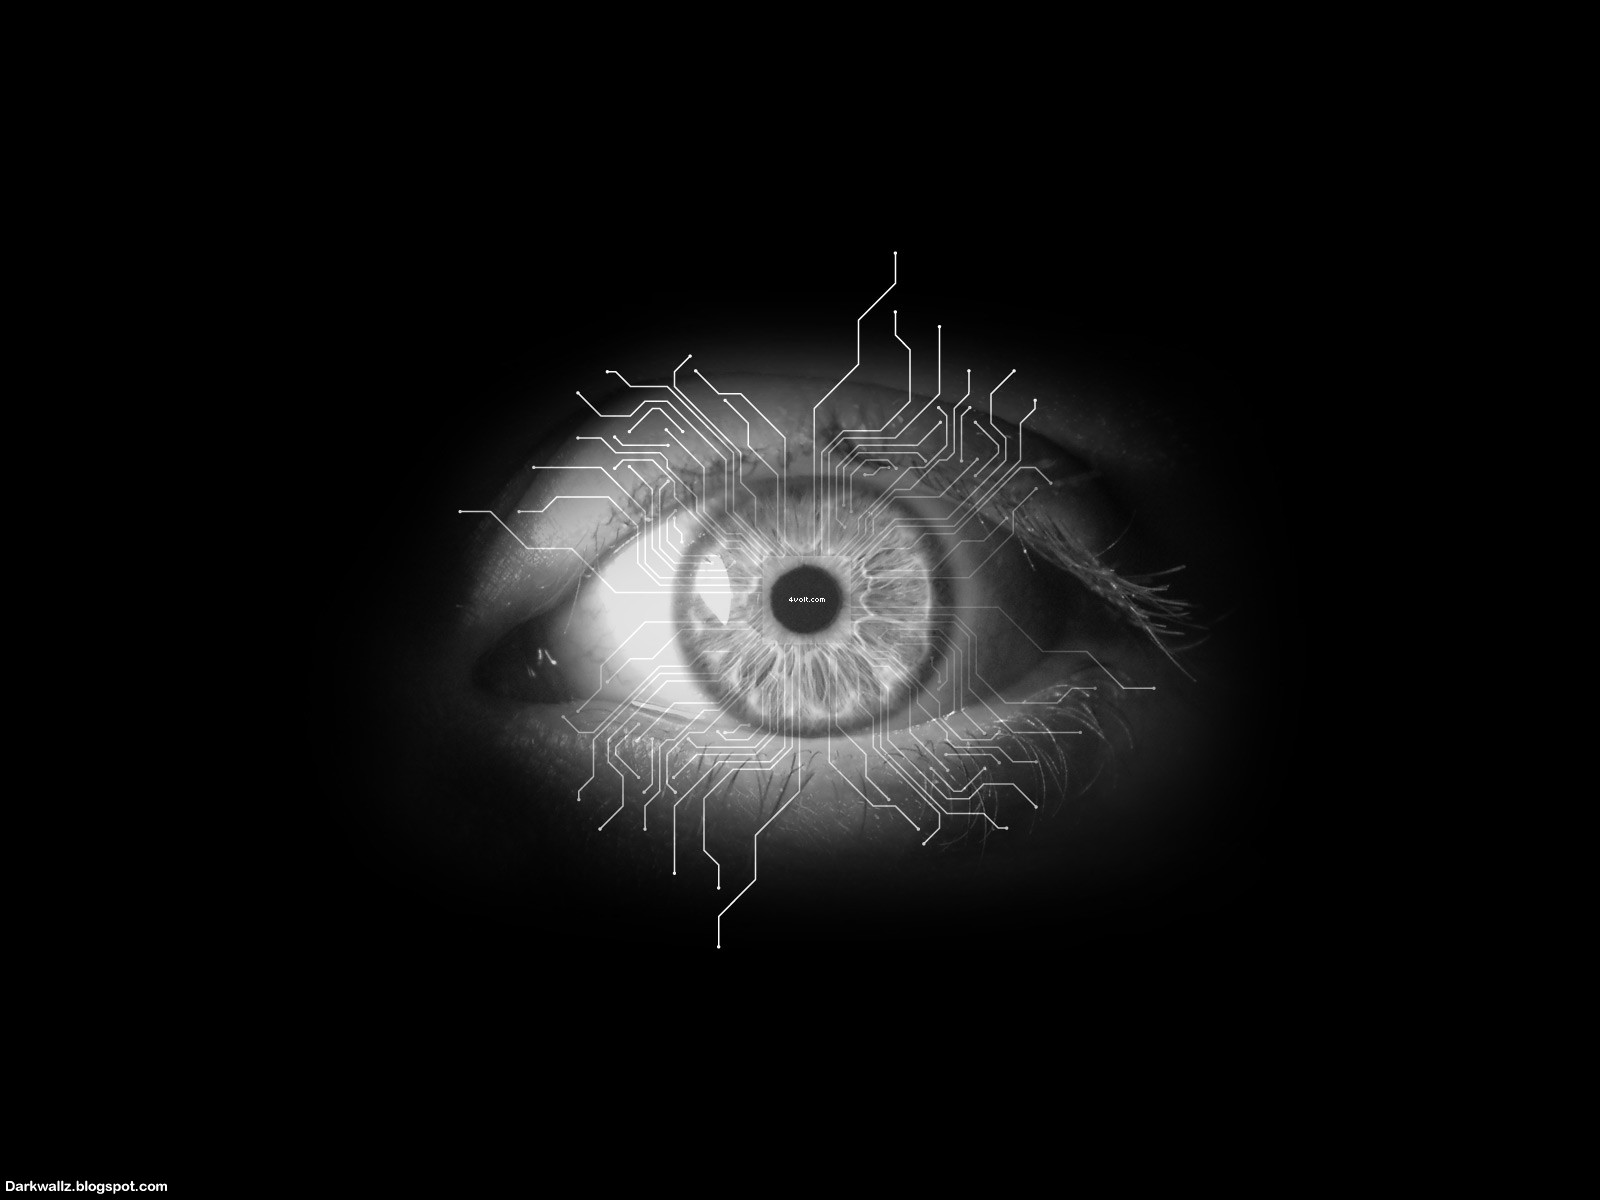 Scary Black Eyes Design Backgrounds | Scary Wallpaper Backgrounds